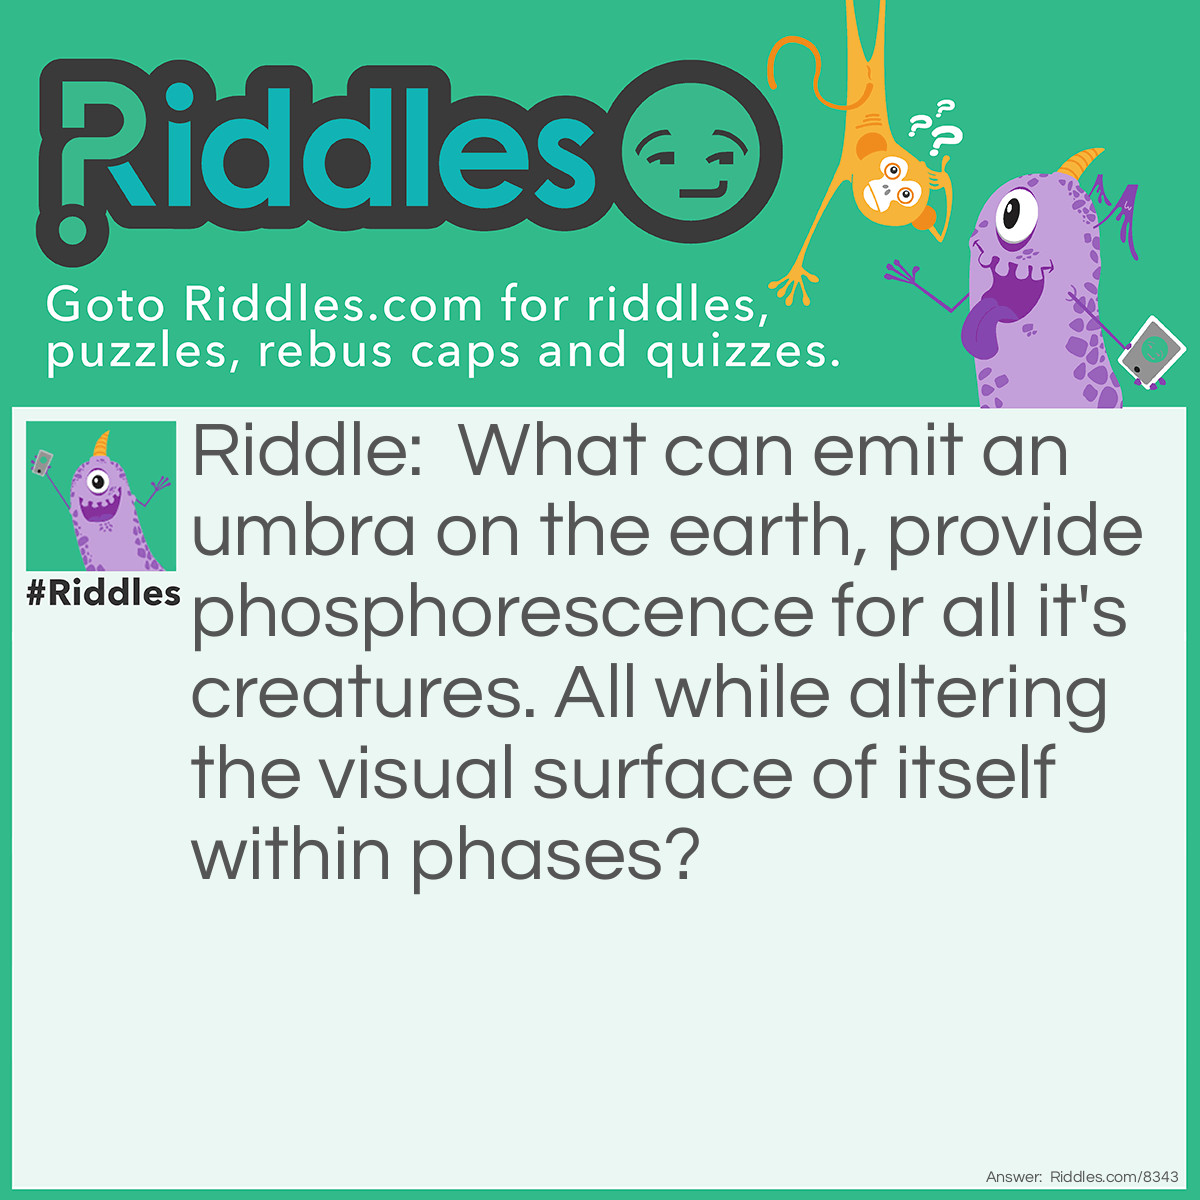 Riddle: What can emit an umbra on the earth, provide phosphorescence for all it's creatures. All while altering the visual surface of itself within phases? Answer: The moon.